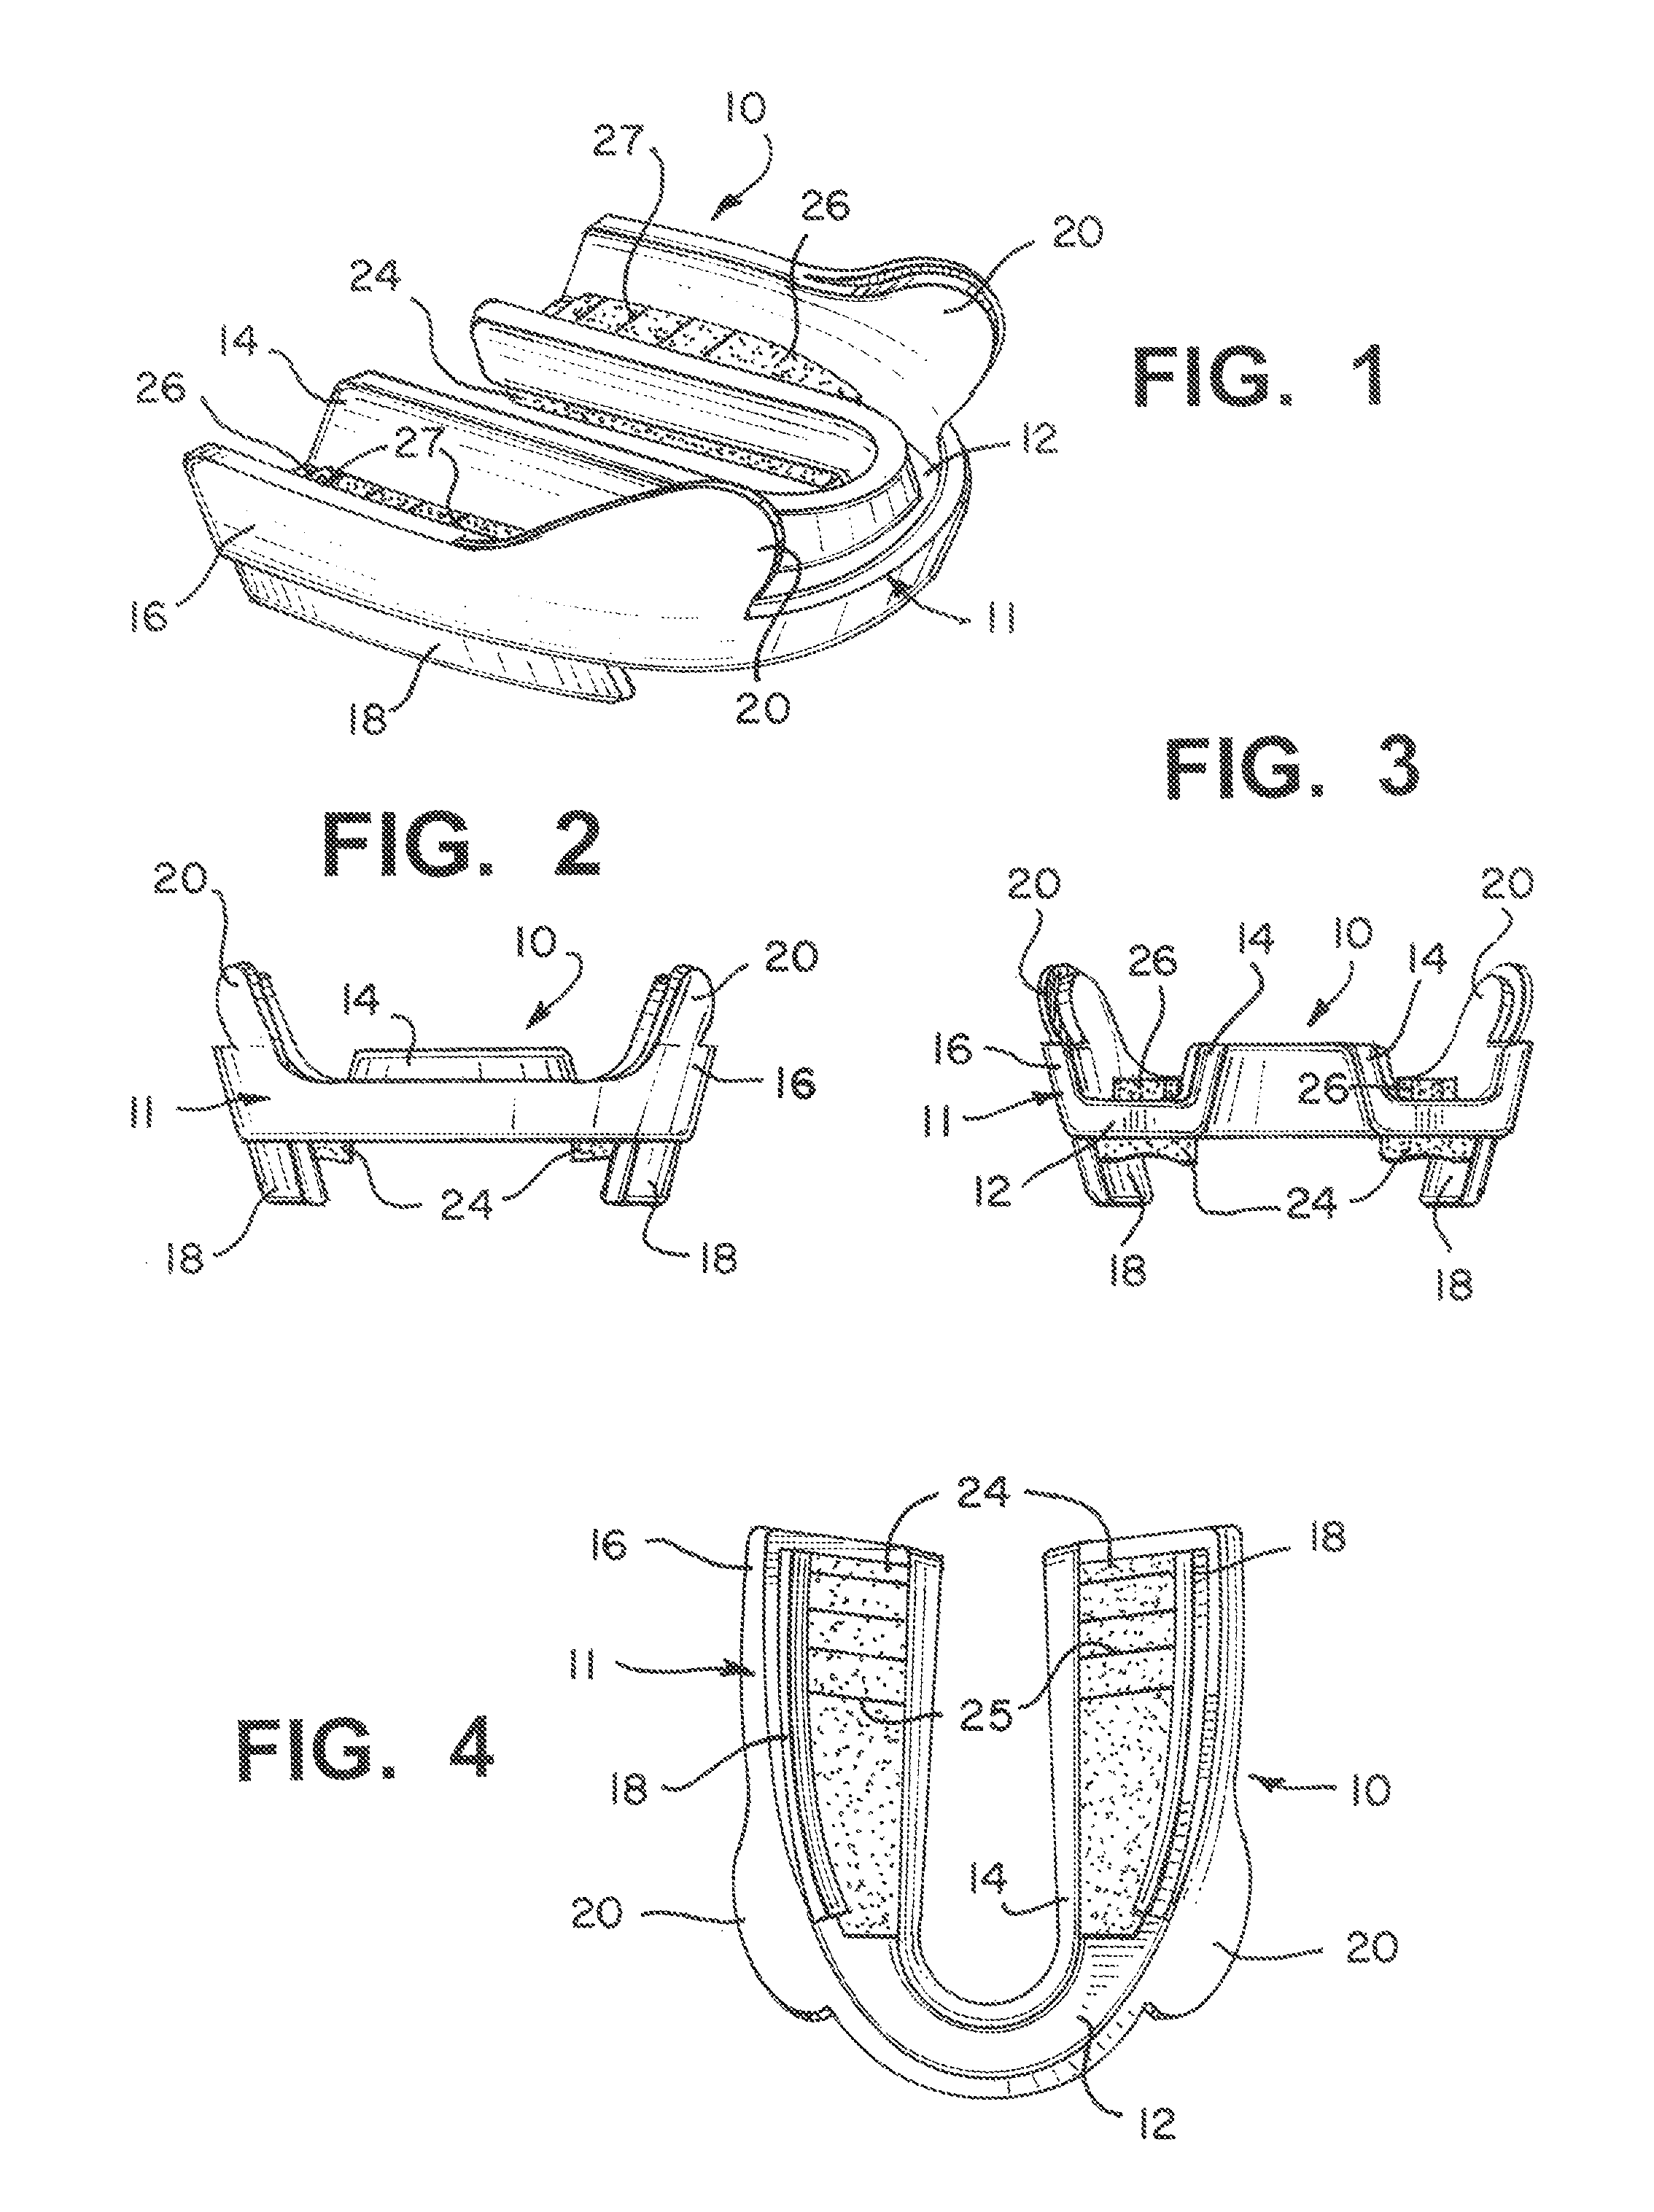 Dental appliance and method of fitting